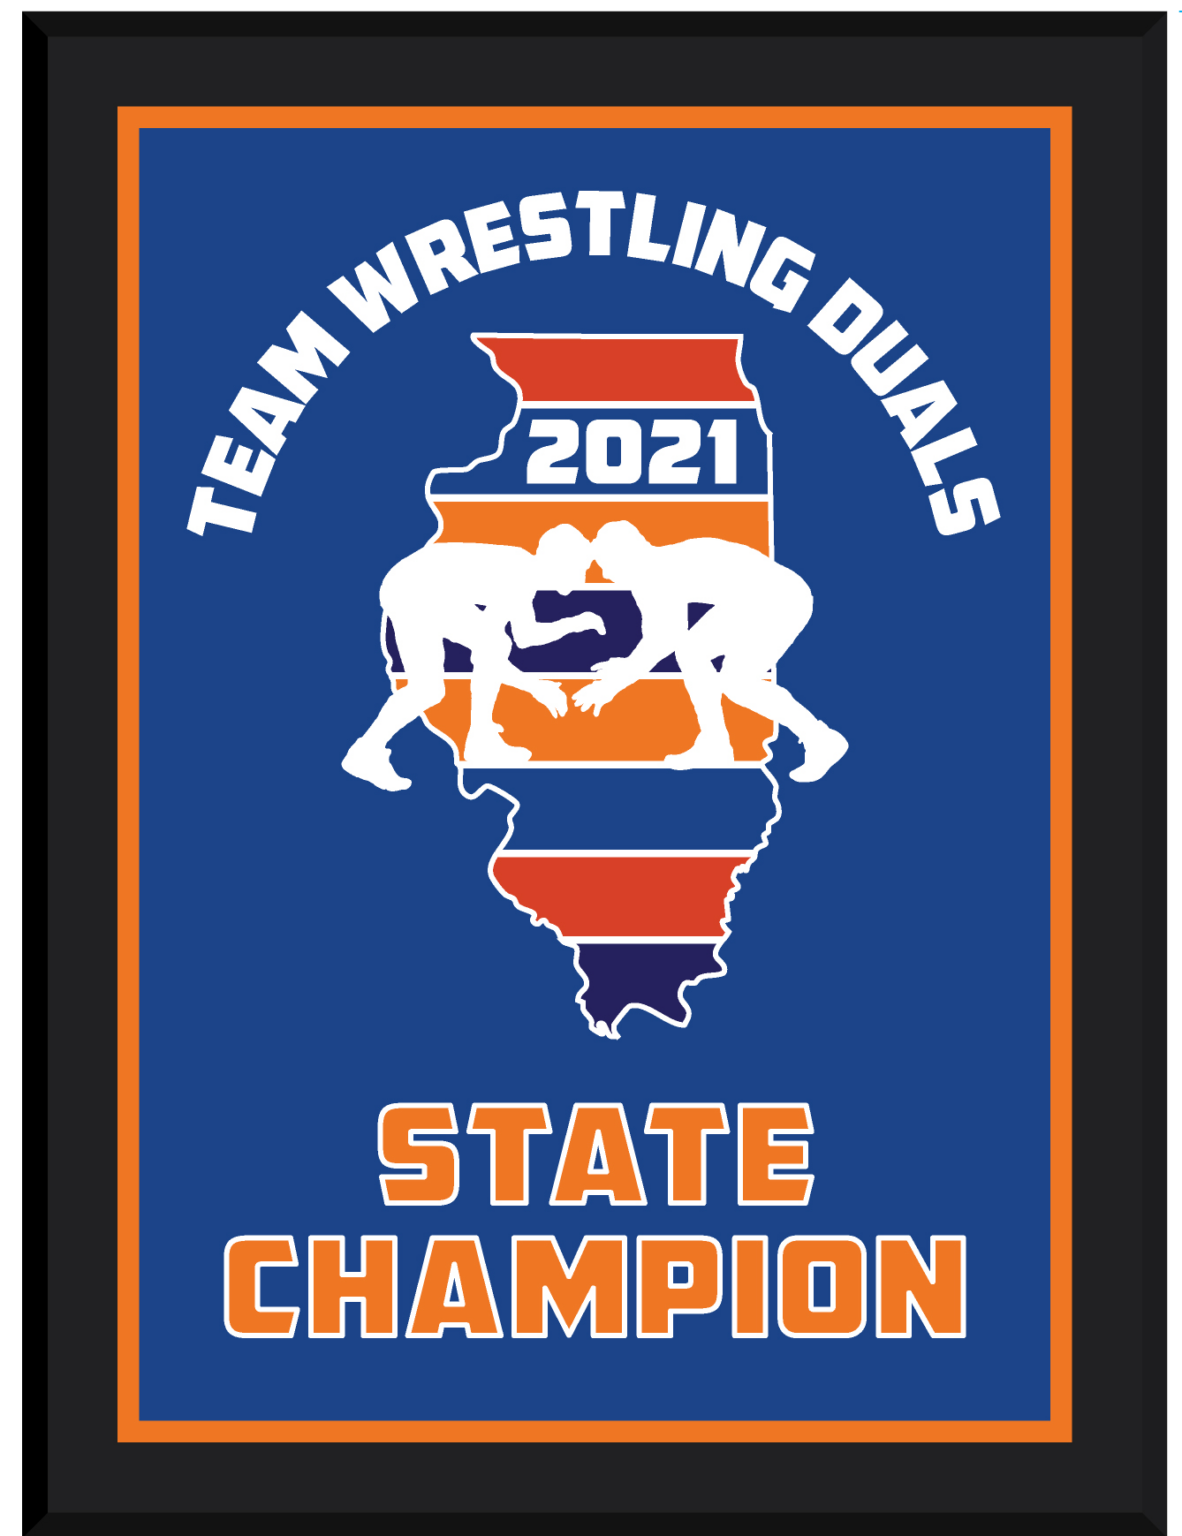 EVENT INFO Illinois State Wrestling Dual Team Championships